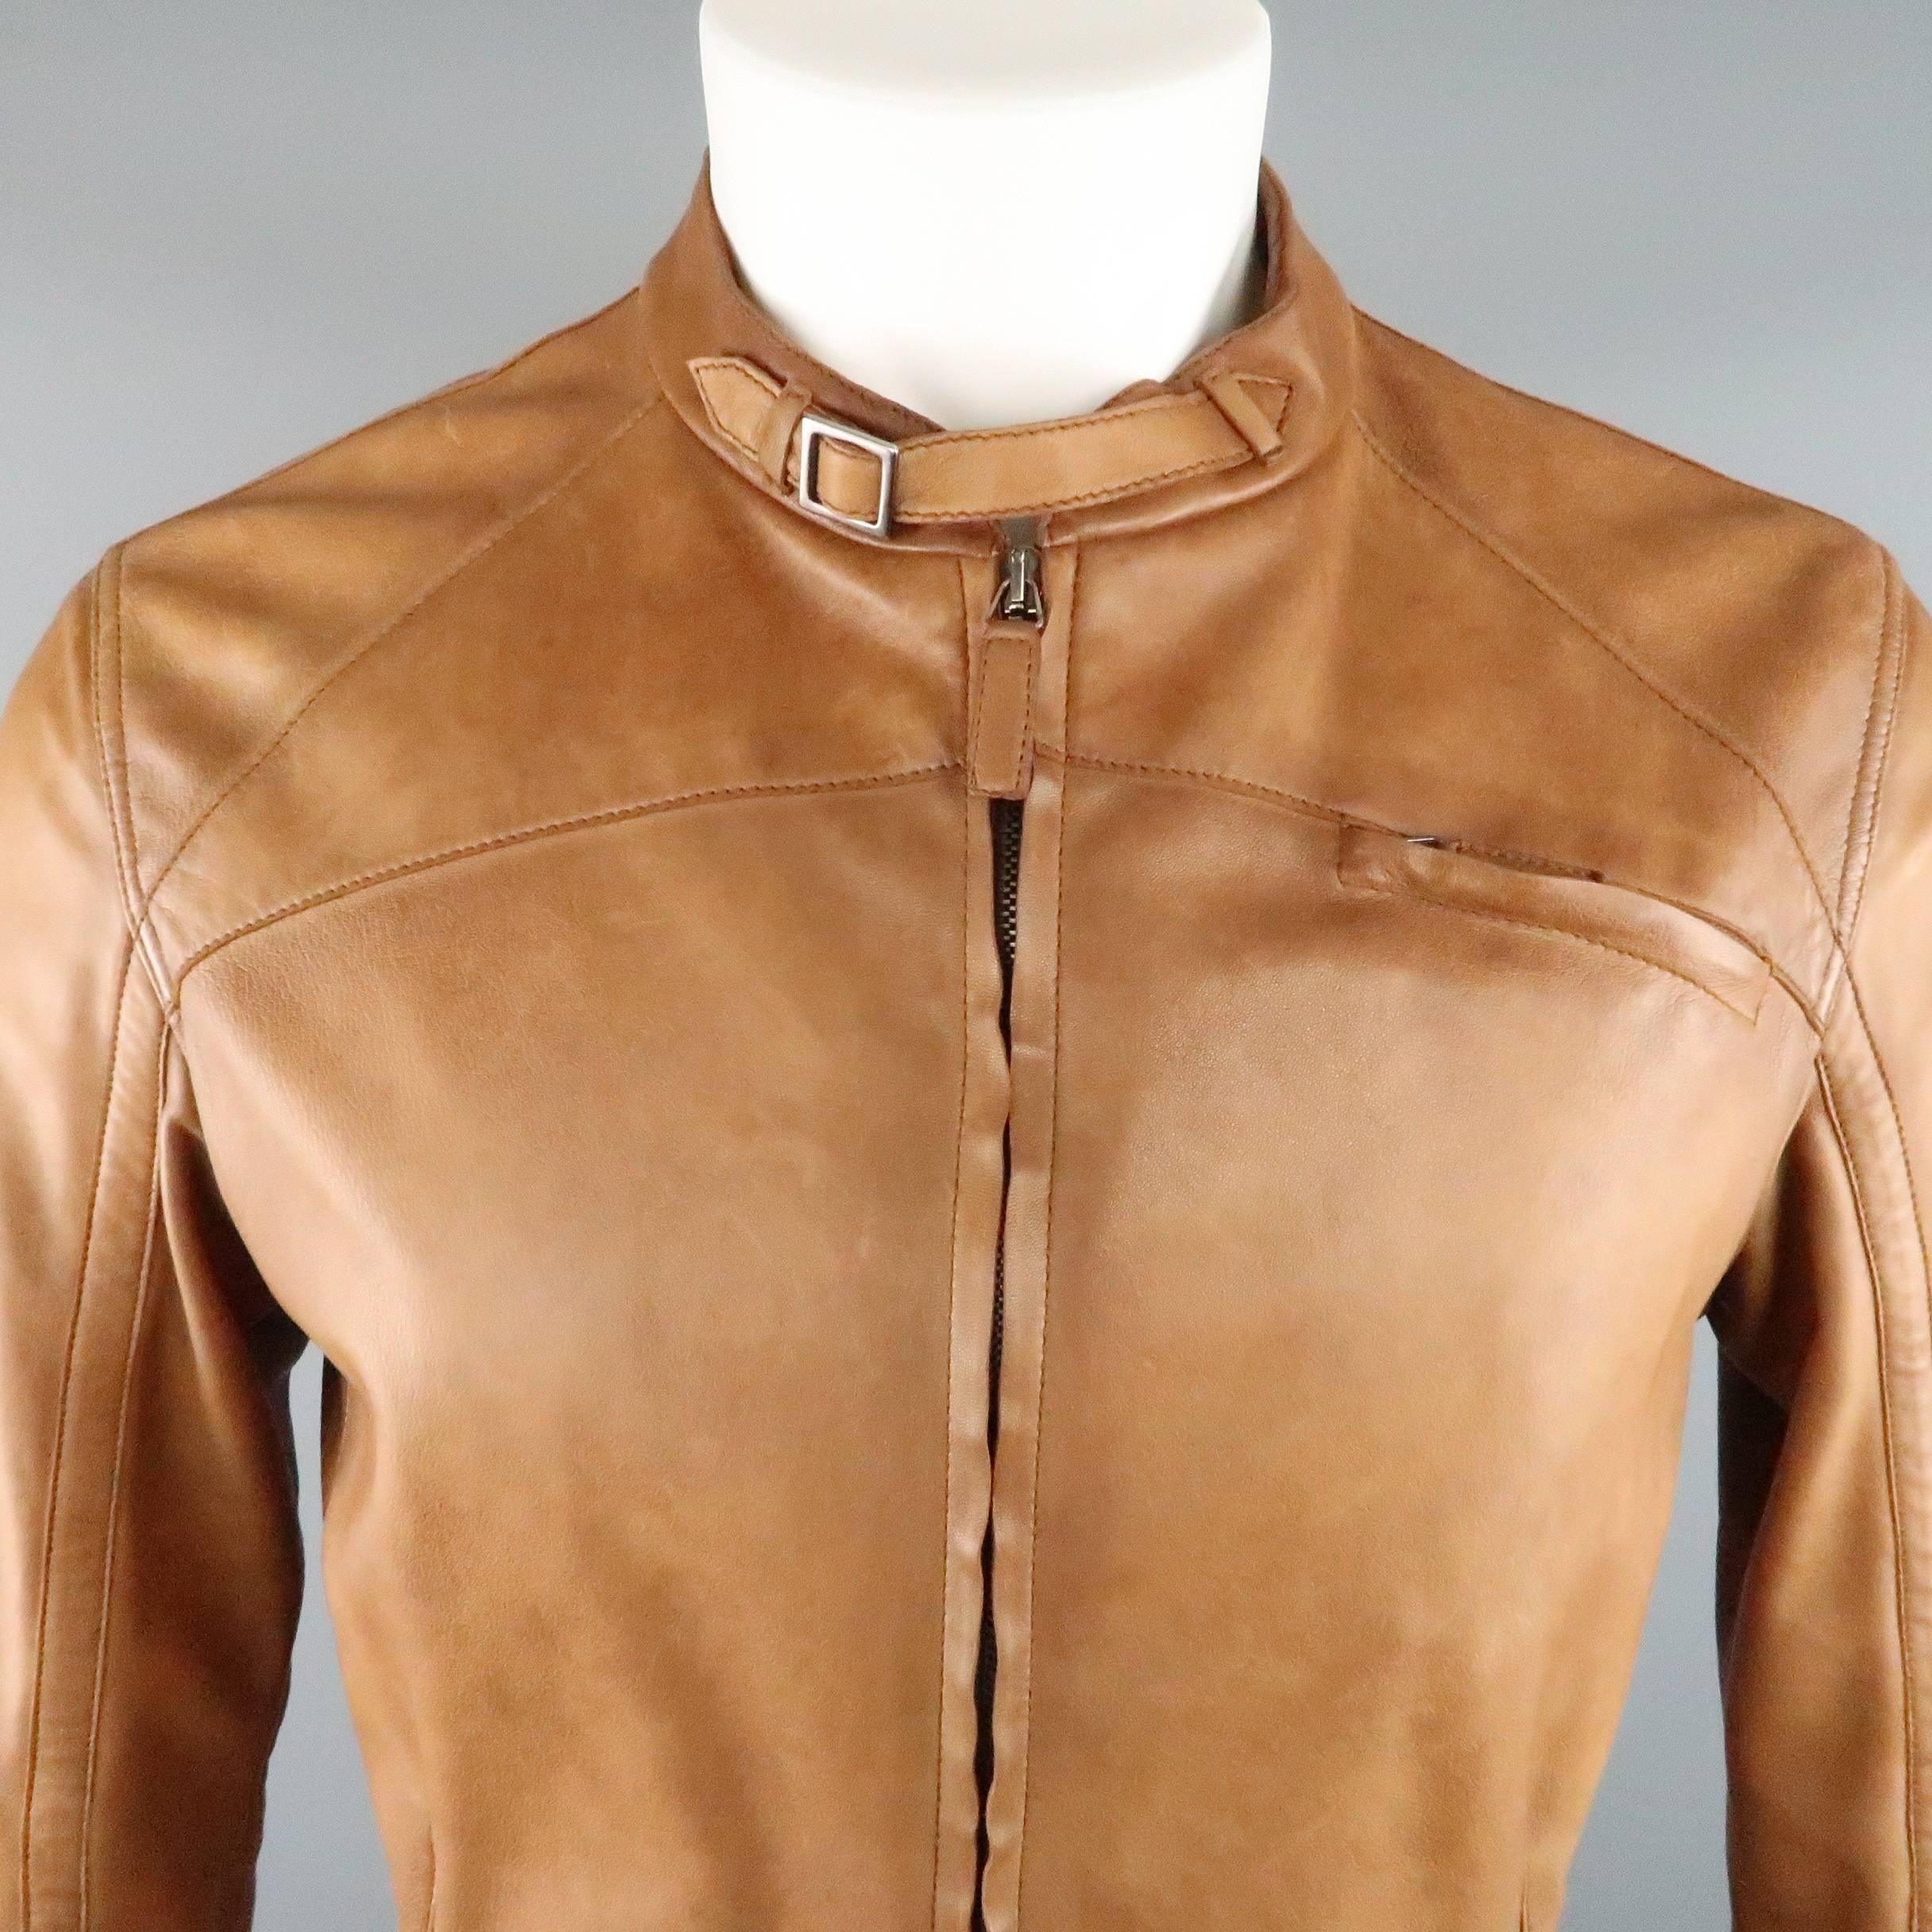 EMPORIO ARMANI biker jacket comes in tan distressed leather and features a belted band collar, zip chest pocket, double zip front, and belted cuffs.
 
Good Pre-Owned Condition.
Marked: IT 50
 
Measurements:
 
Shoulder: 18 in.
Chest: 42 in.
Sleeve: